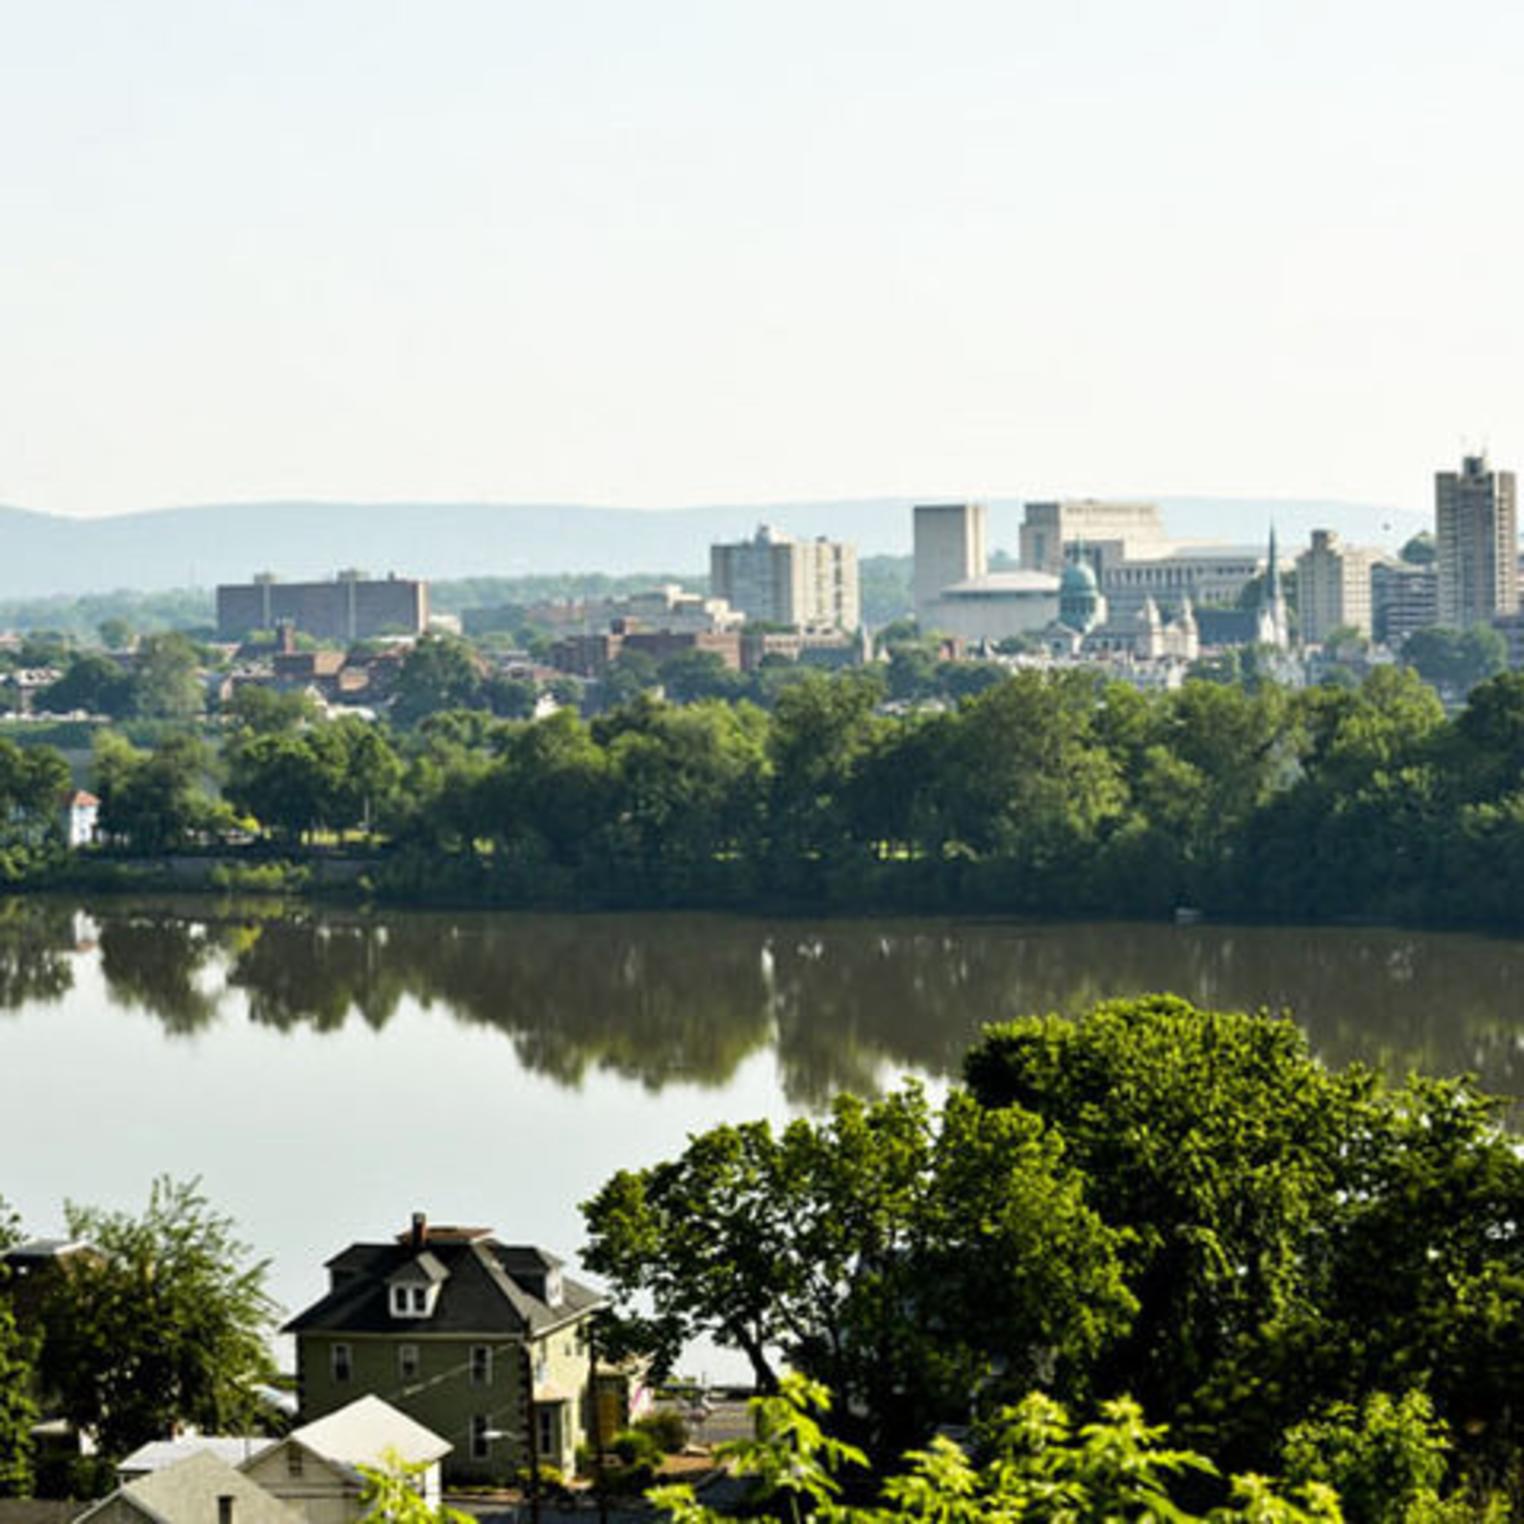 View of Susquehanna River and Harrisburg from Negley Park in Lemoyne